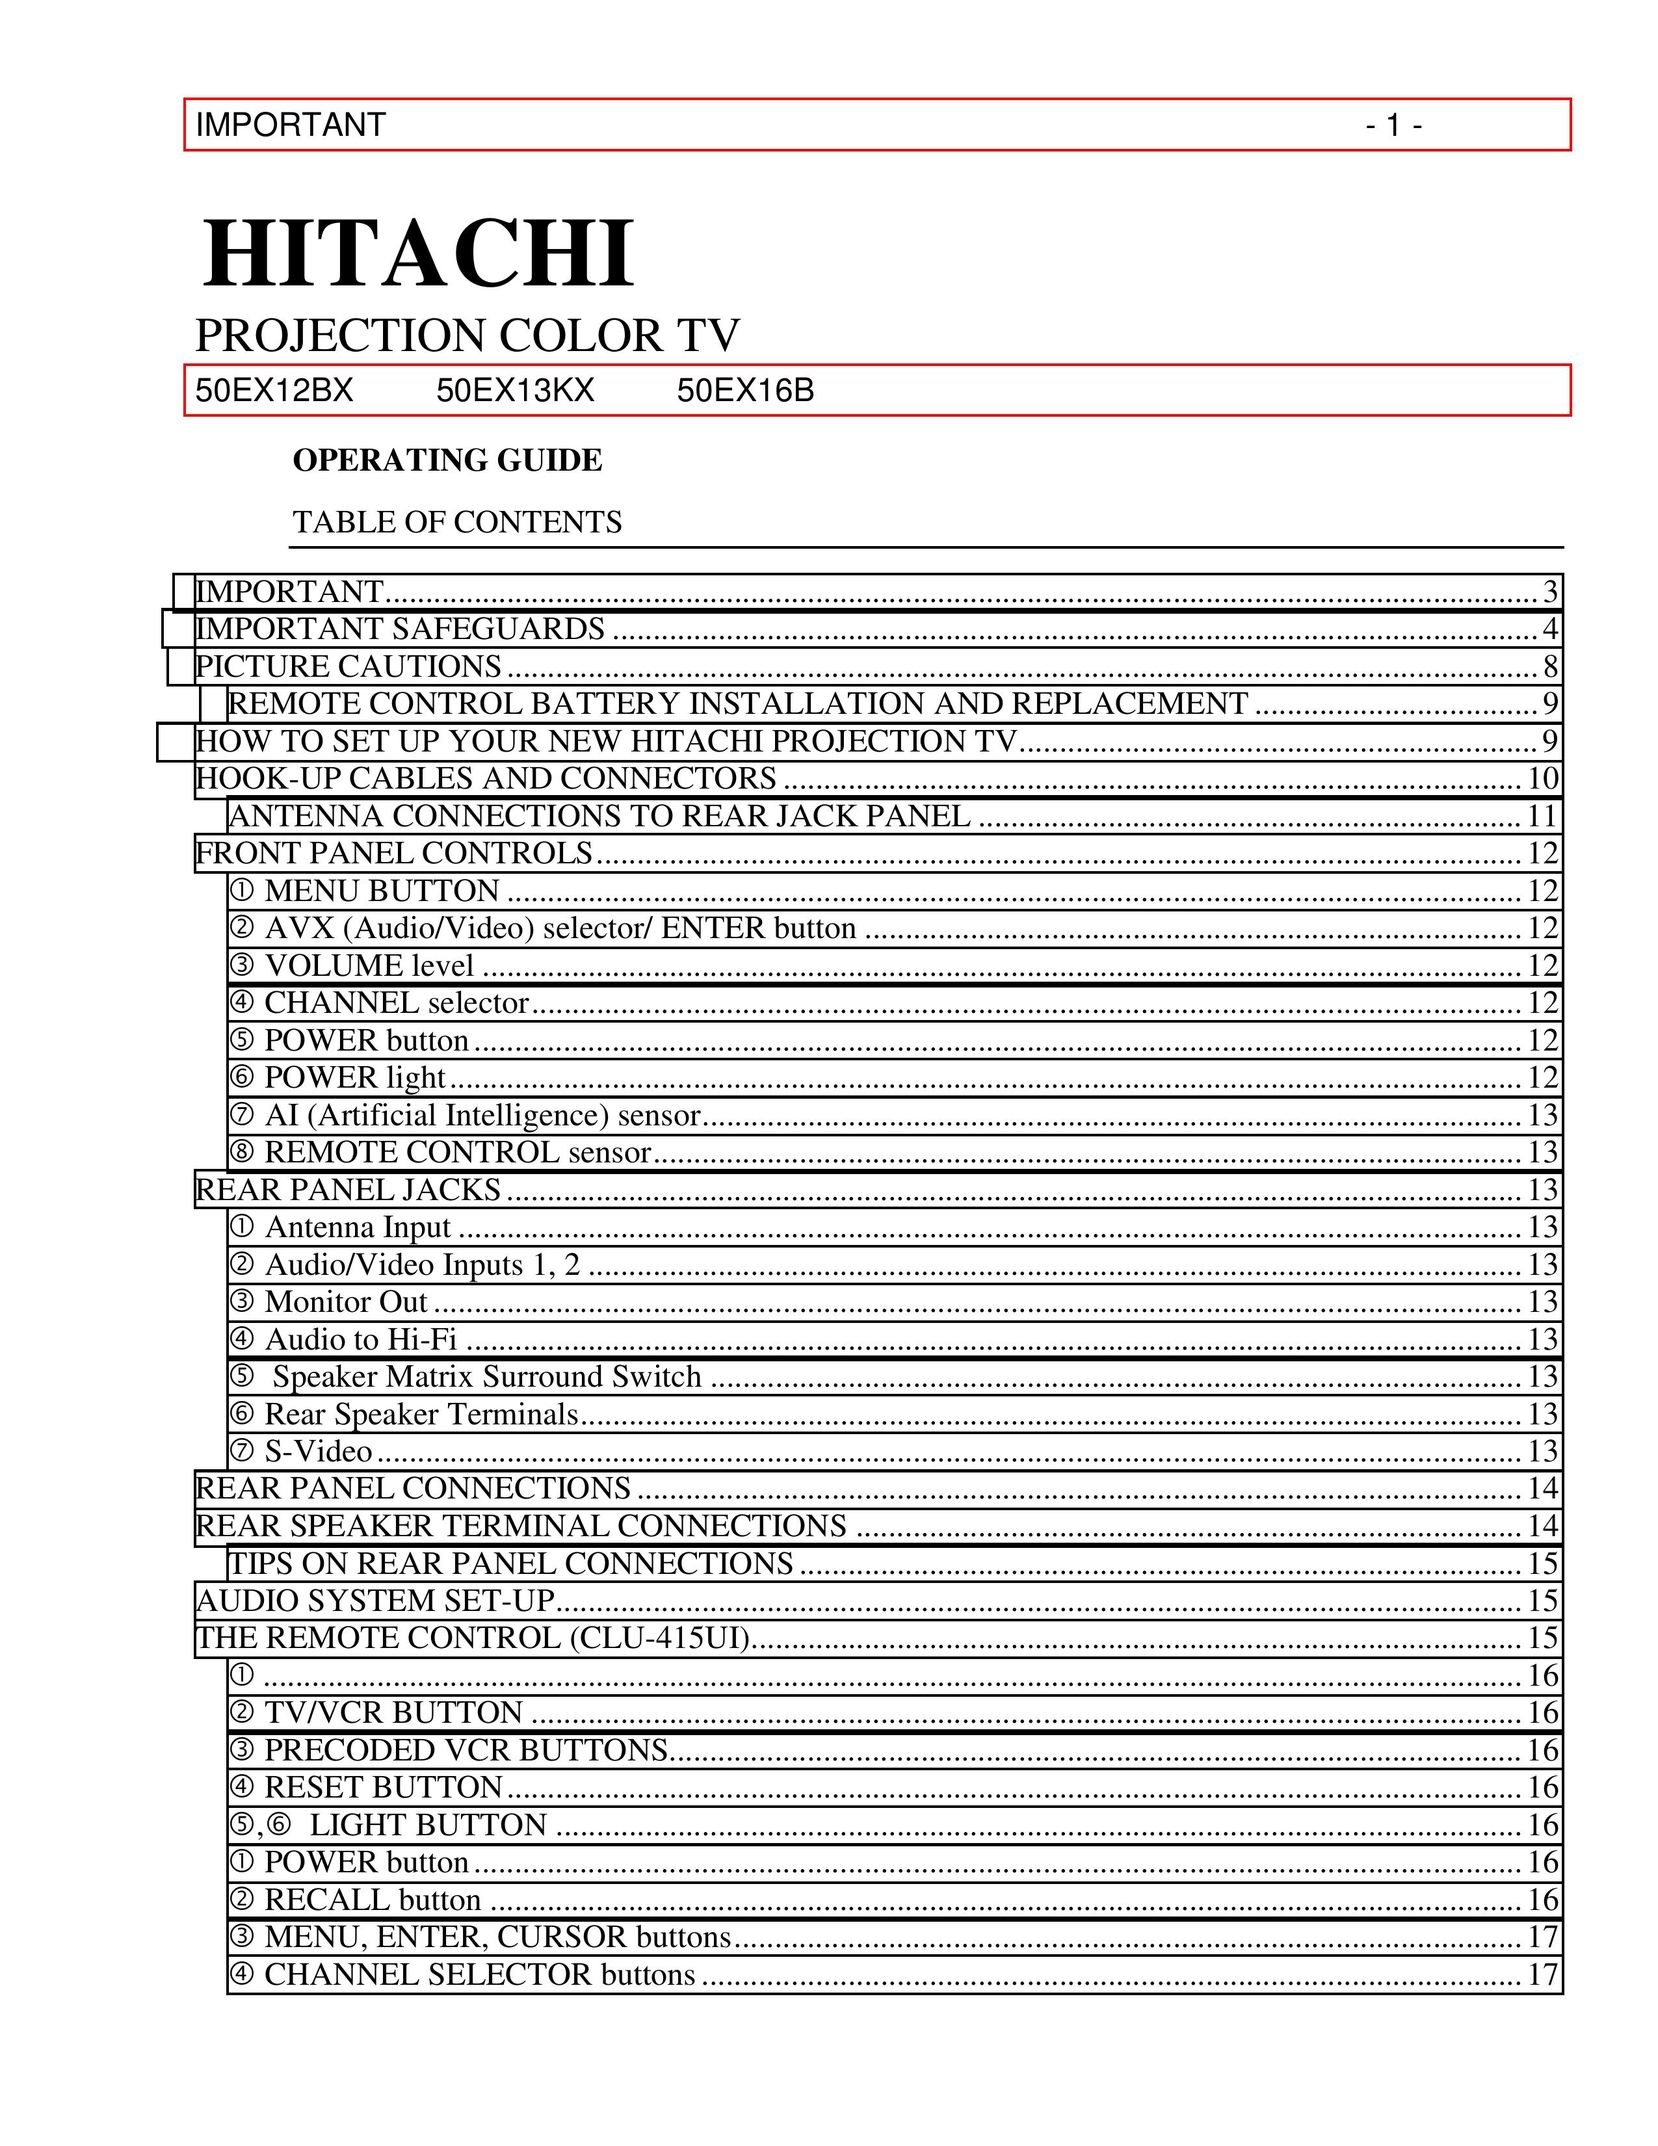 Hitachi 50EX12BX Projection Television User Manual